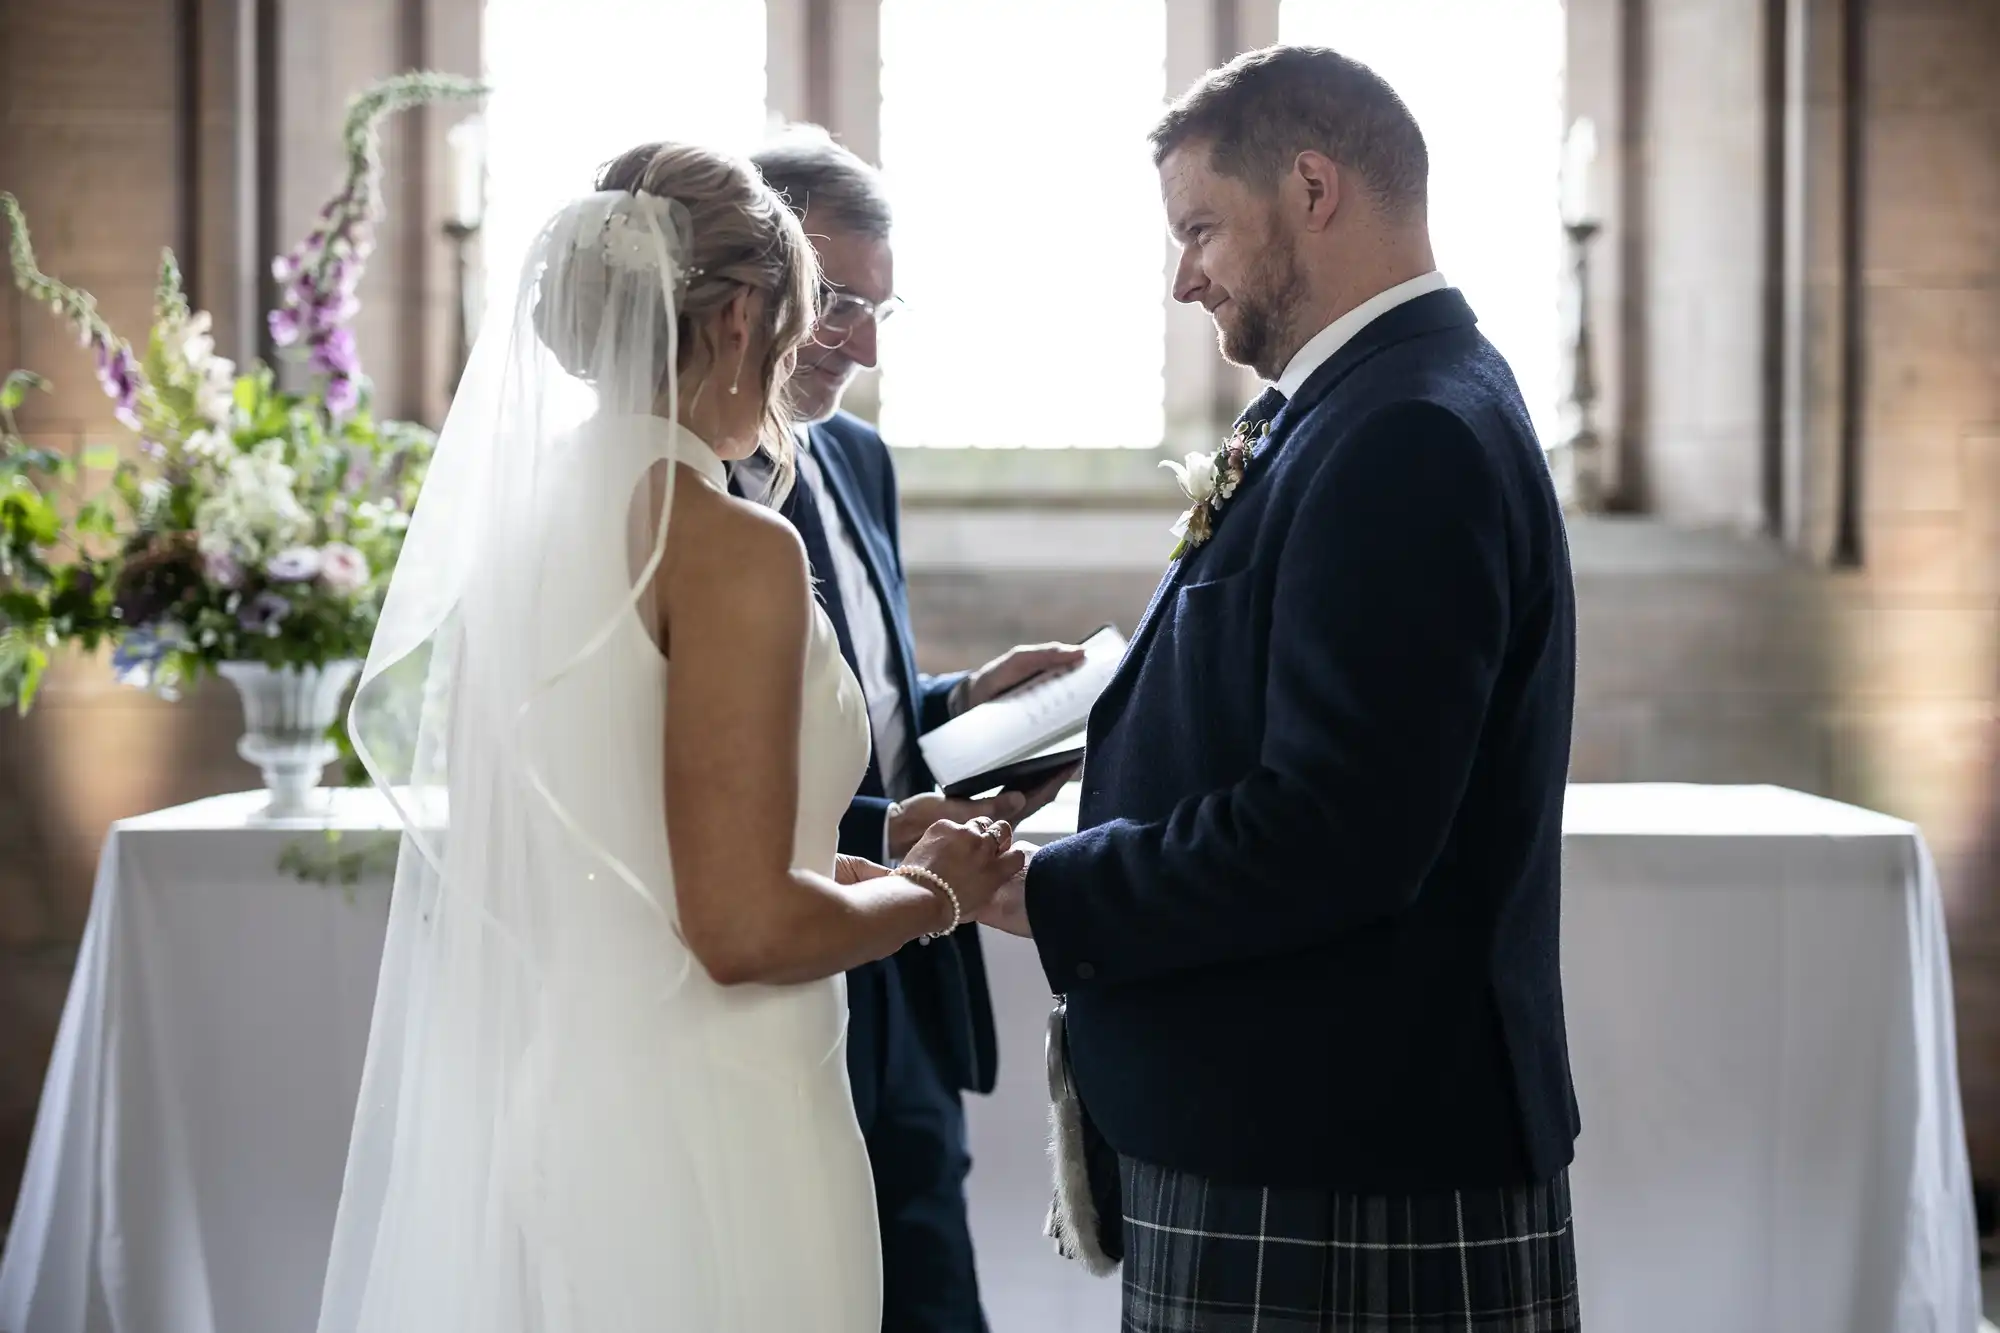 A bride and groom exchanging rings during a wedding ceremony, officiated by a woman, inside a sunlit room.